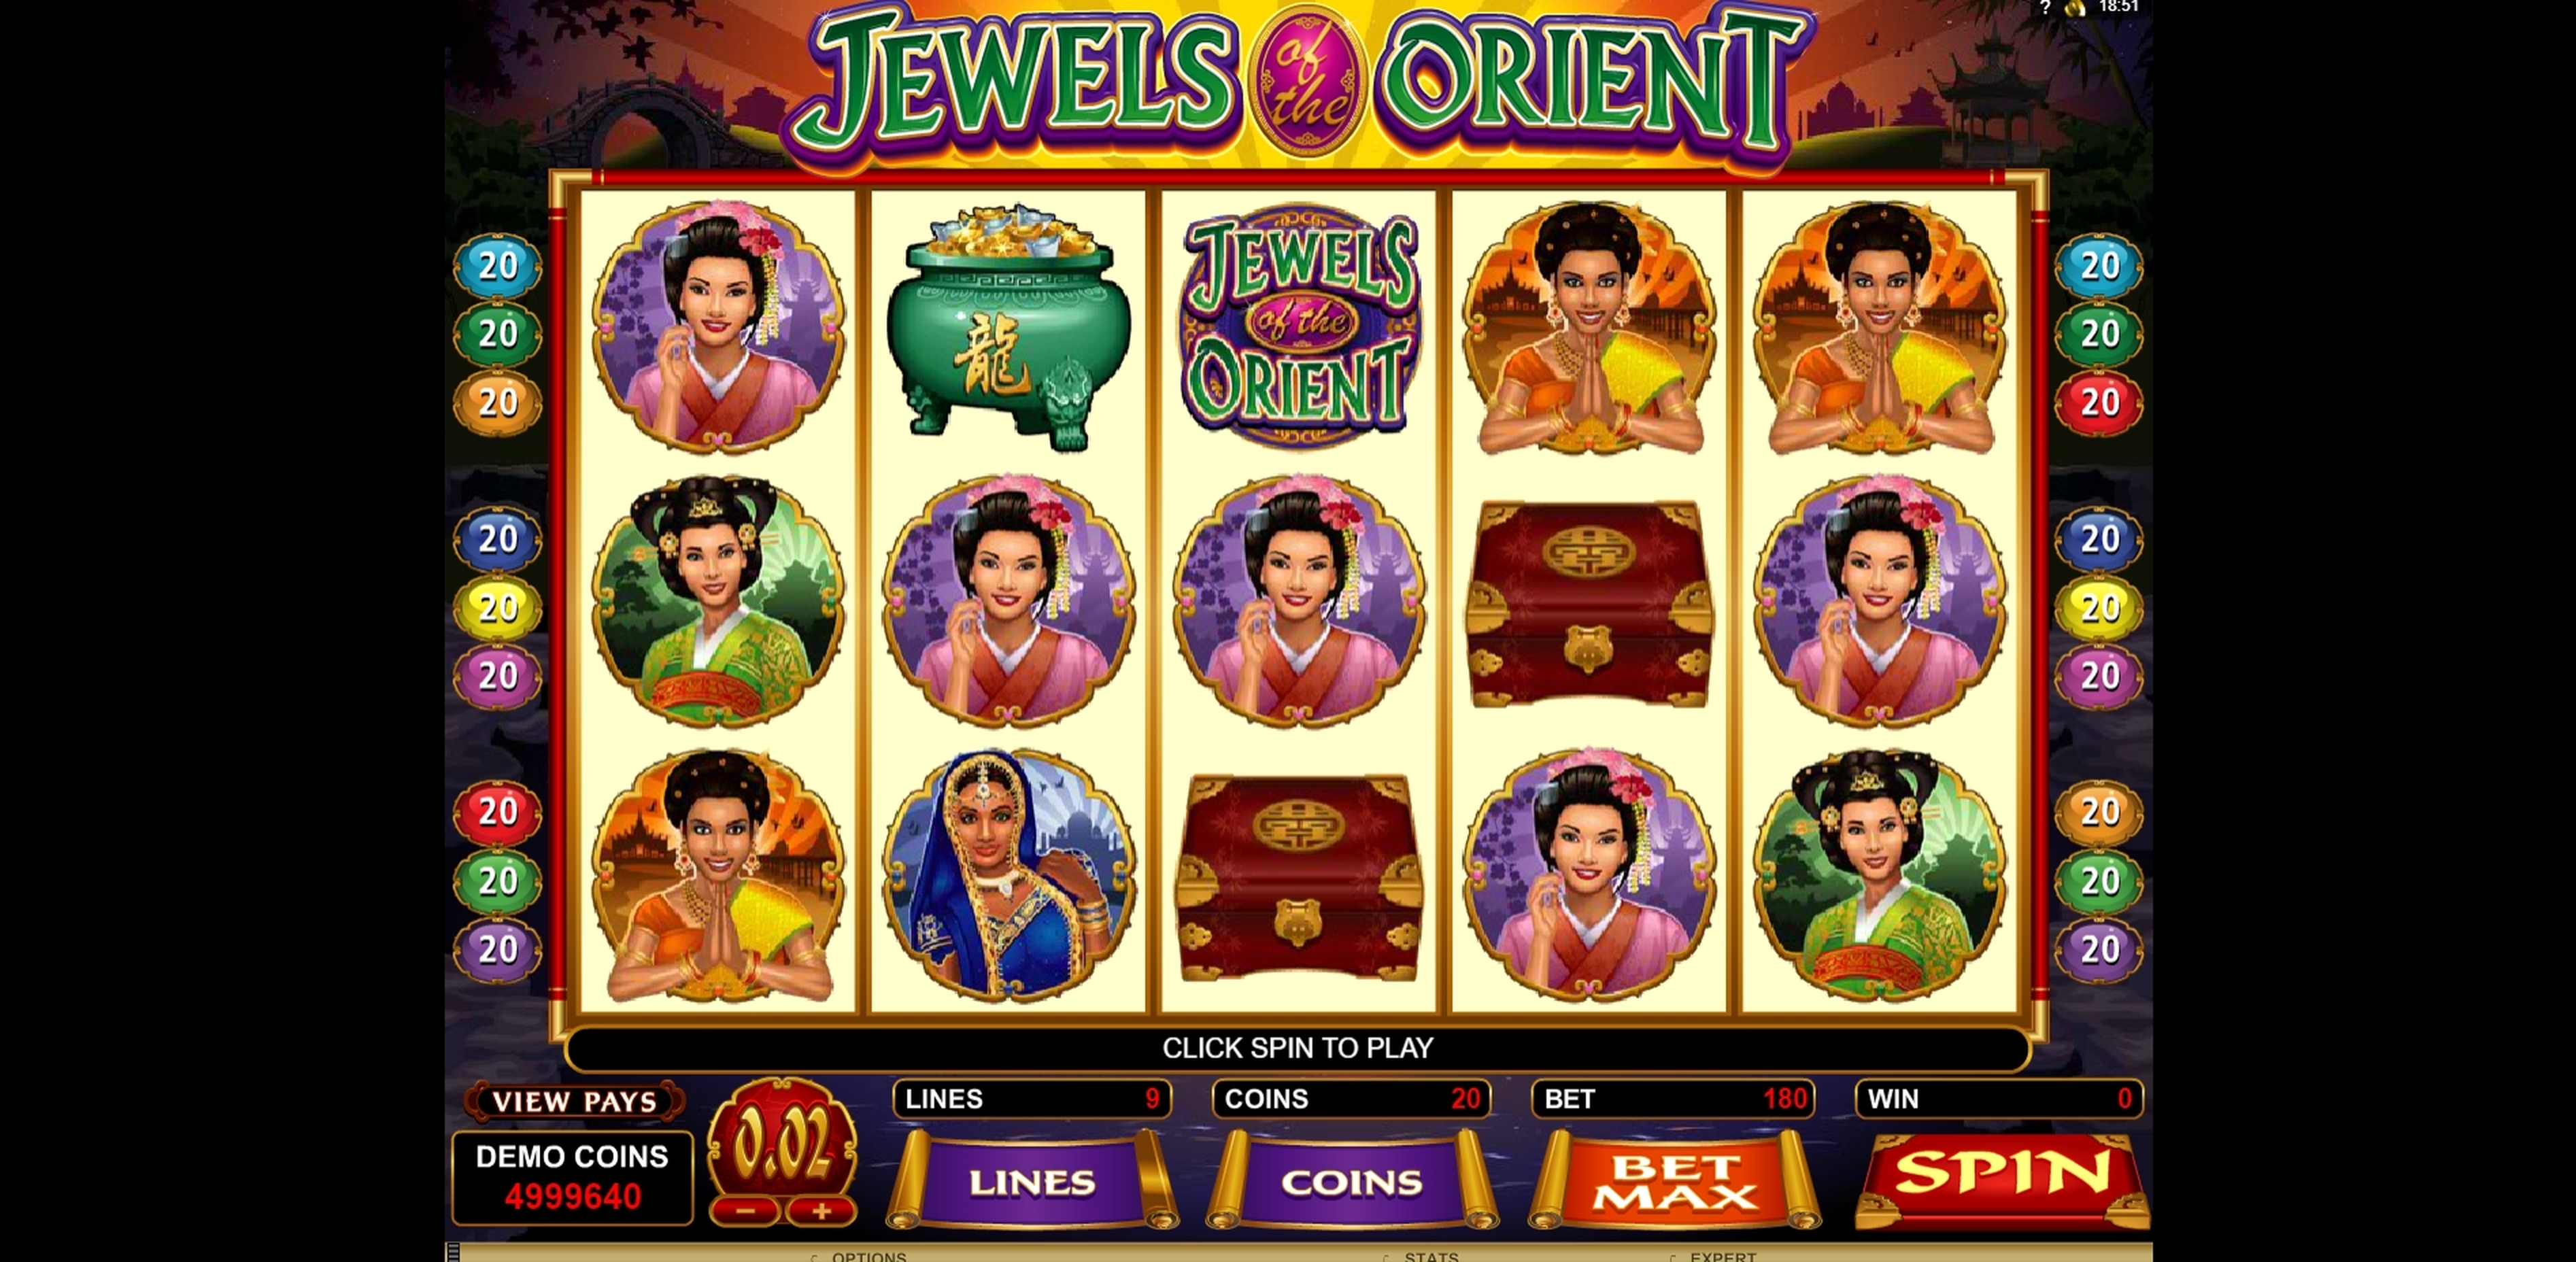 Win Money in Jewels of the Orient Free Slot Game by Microgaming